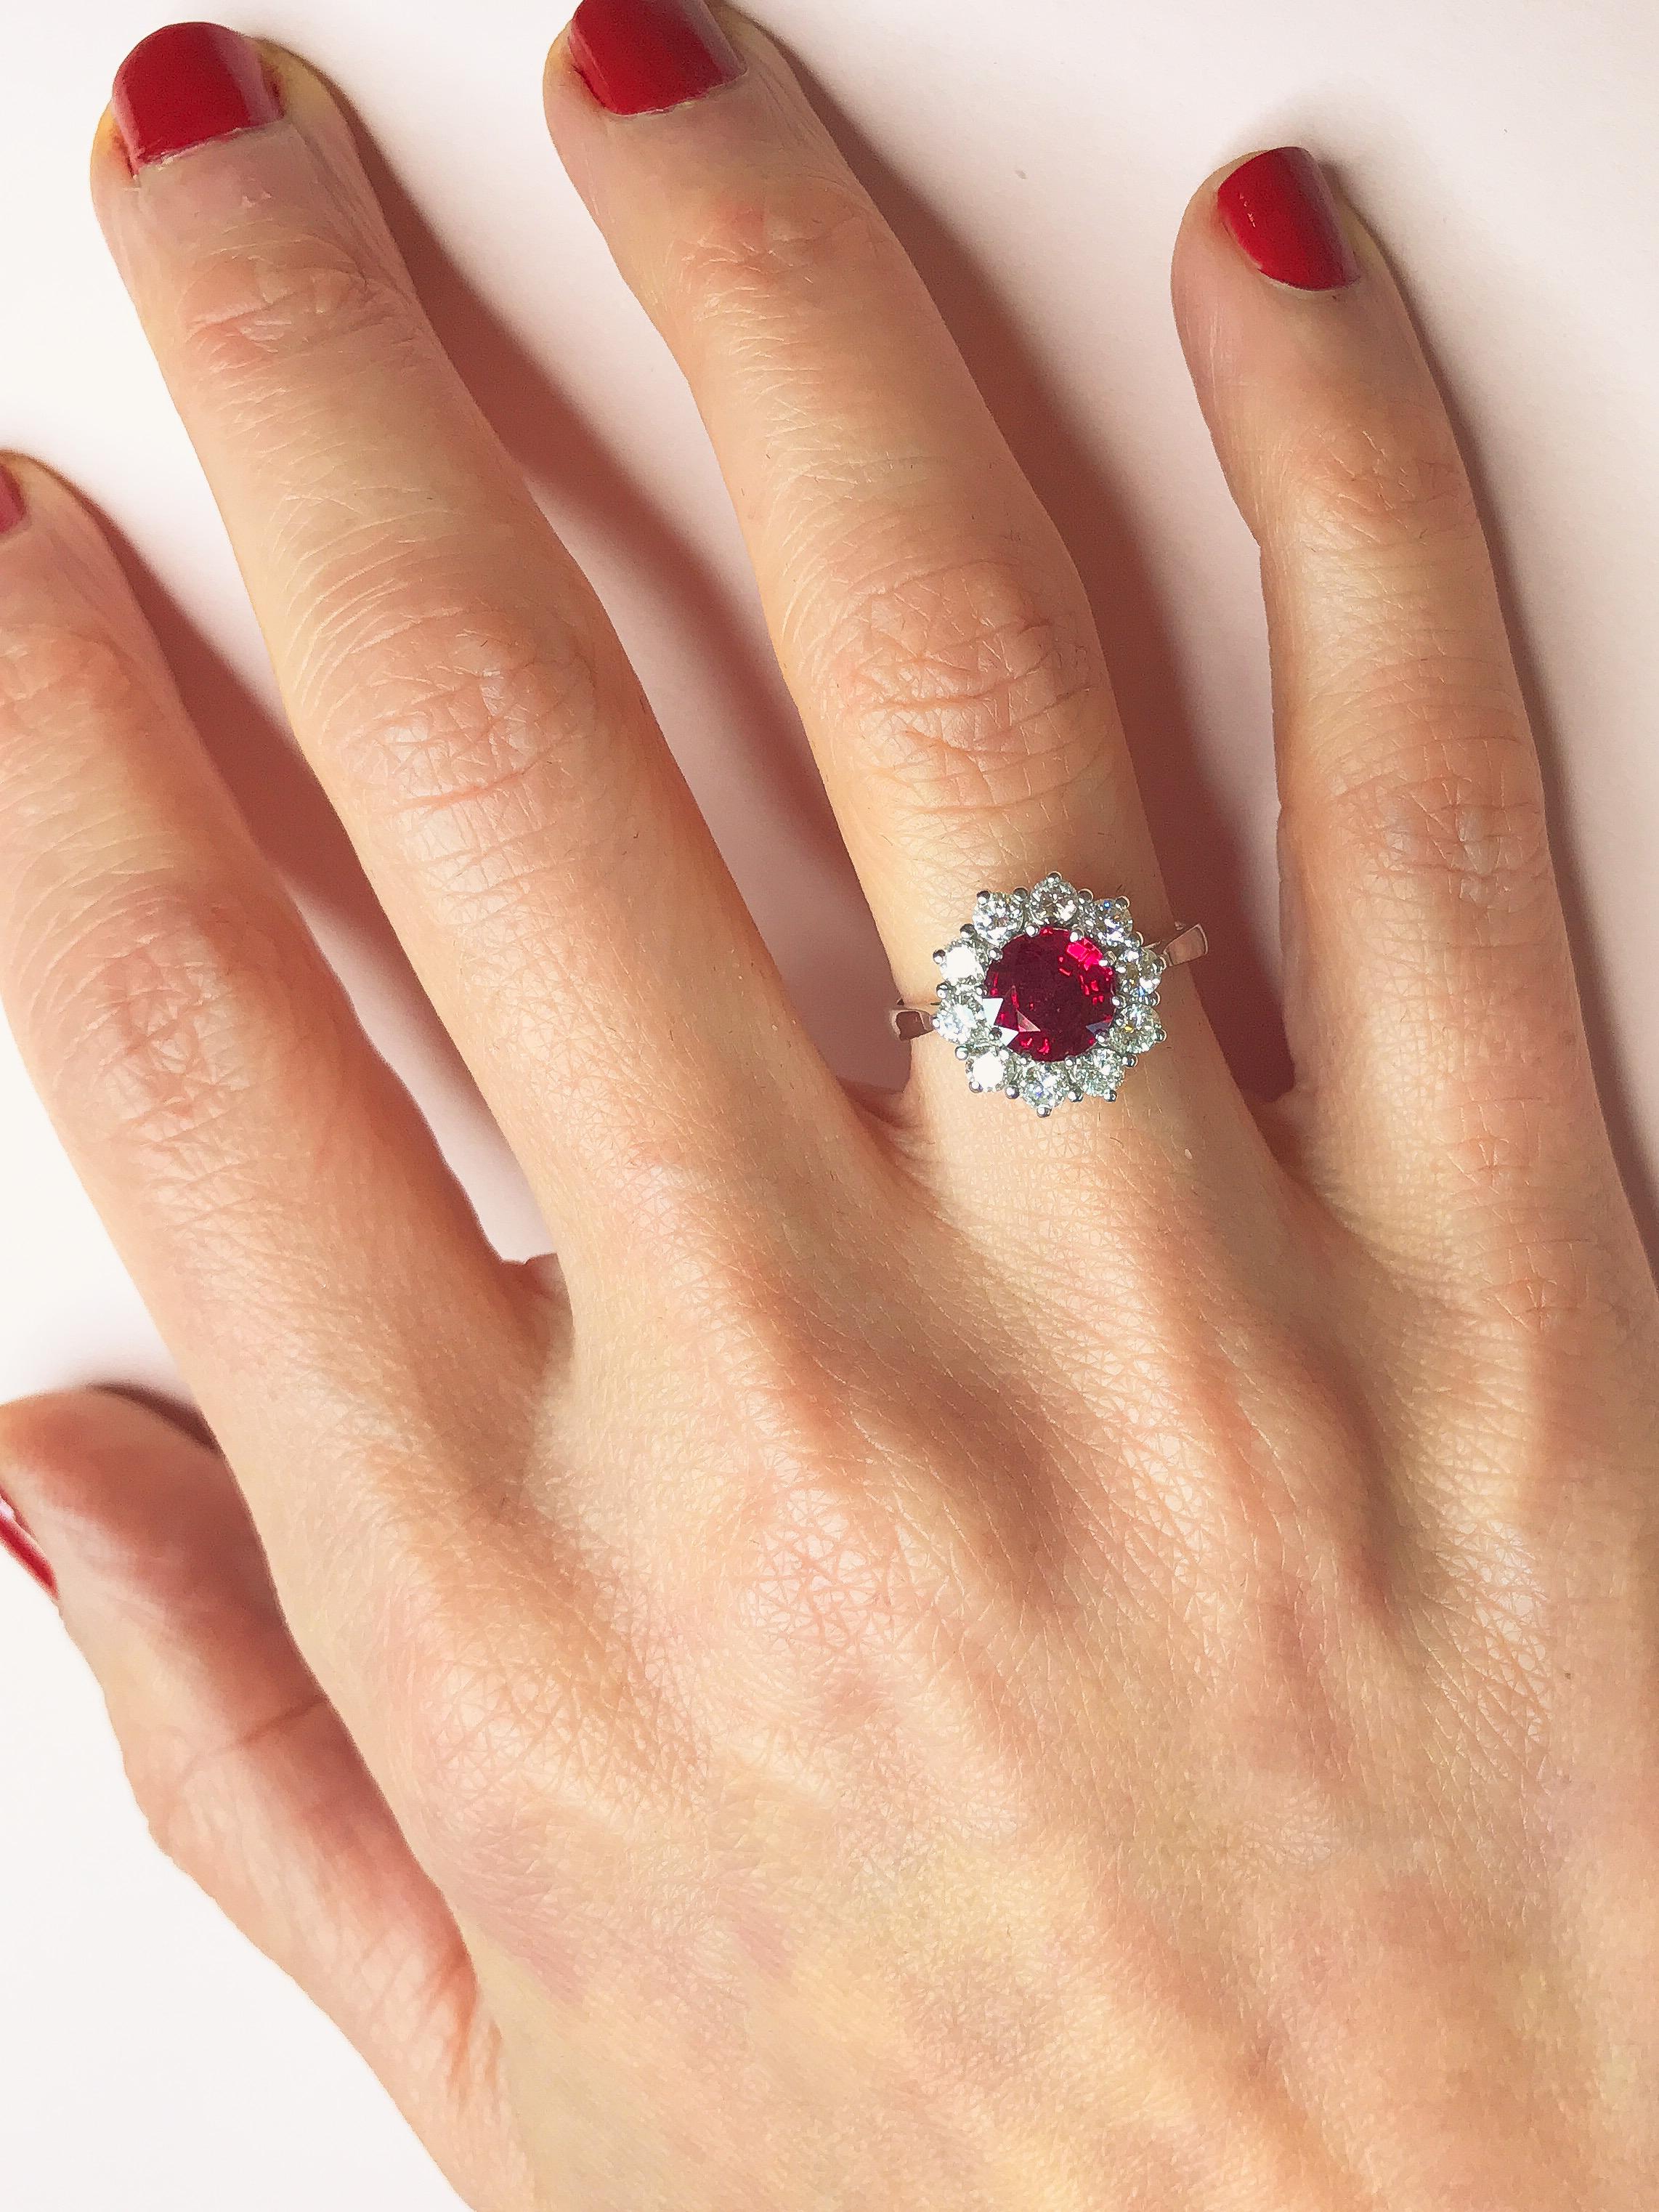 A deep red ruby hand-picked from the Haruni vault makes a striking centrepiece for this spectacular white gold ring. The round cut stone boasts a rich, vivid colour, further amplified by its surround of sparkling white diamonds. This is an